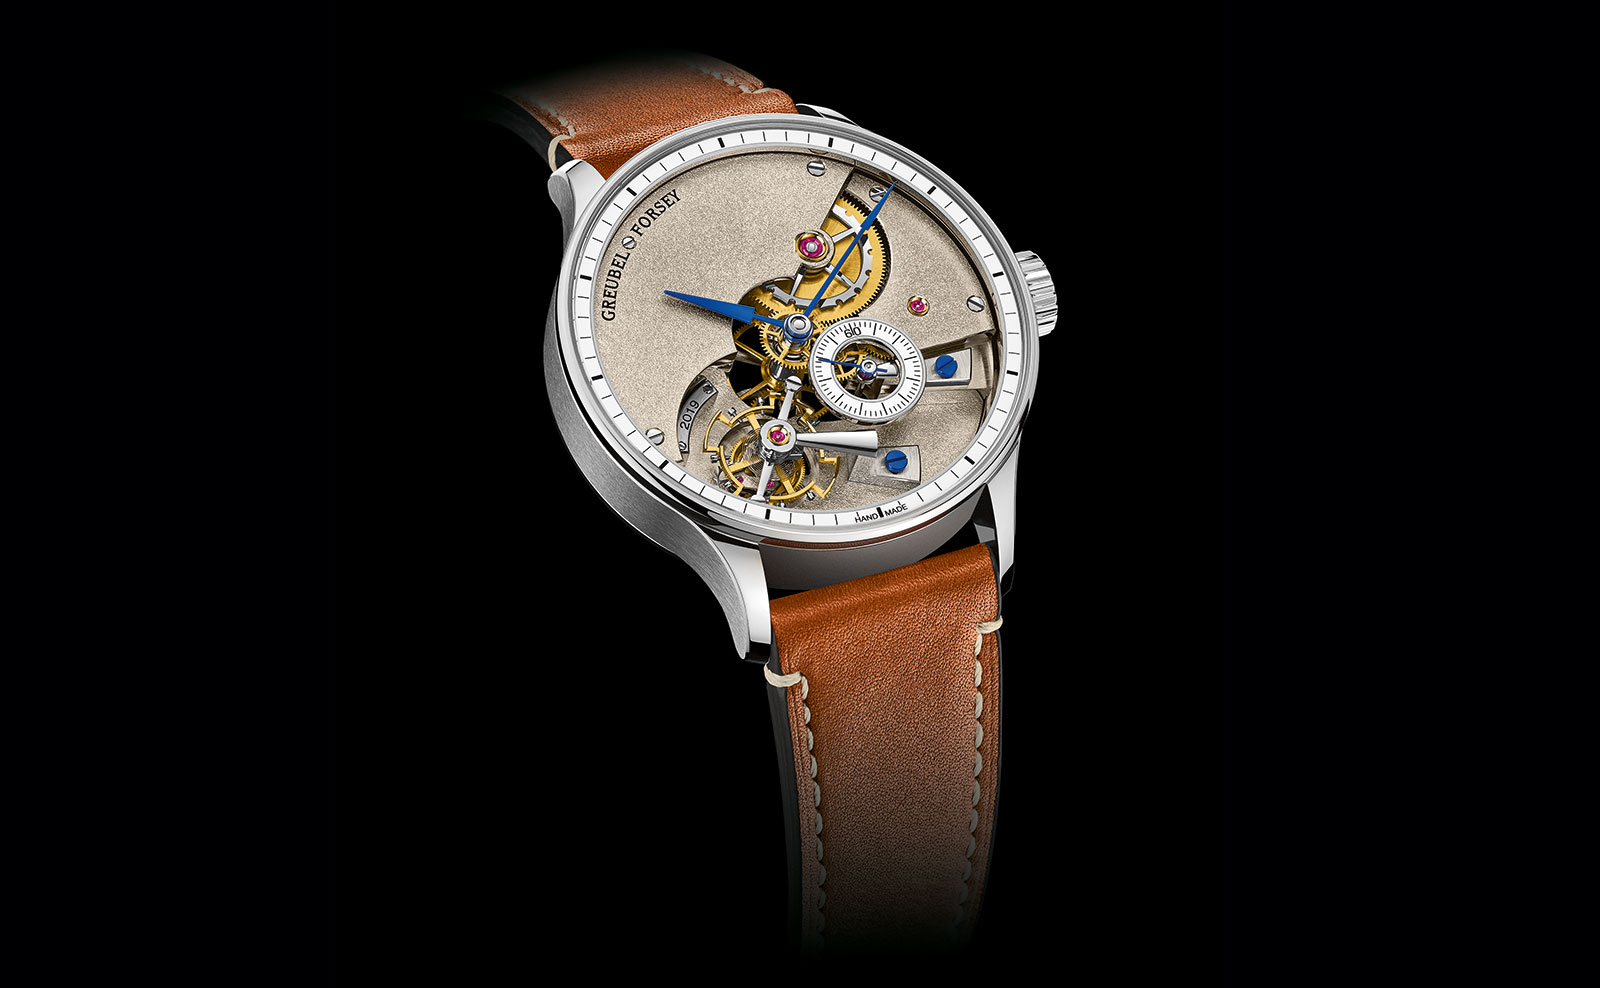 Greubel Forsey Introduces the Entirely Hand-Made Tourbillon Watch